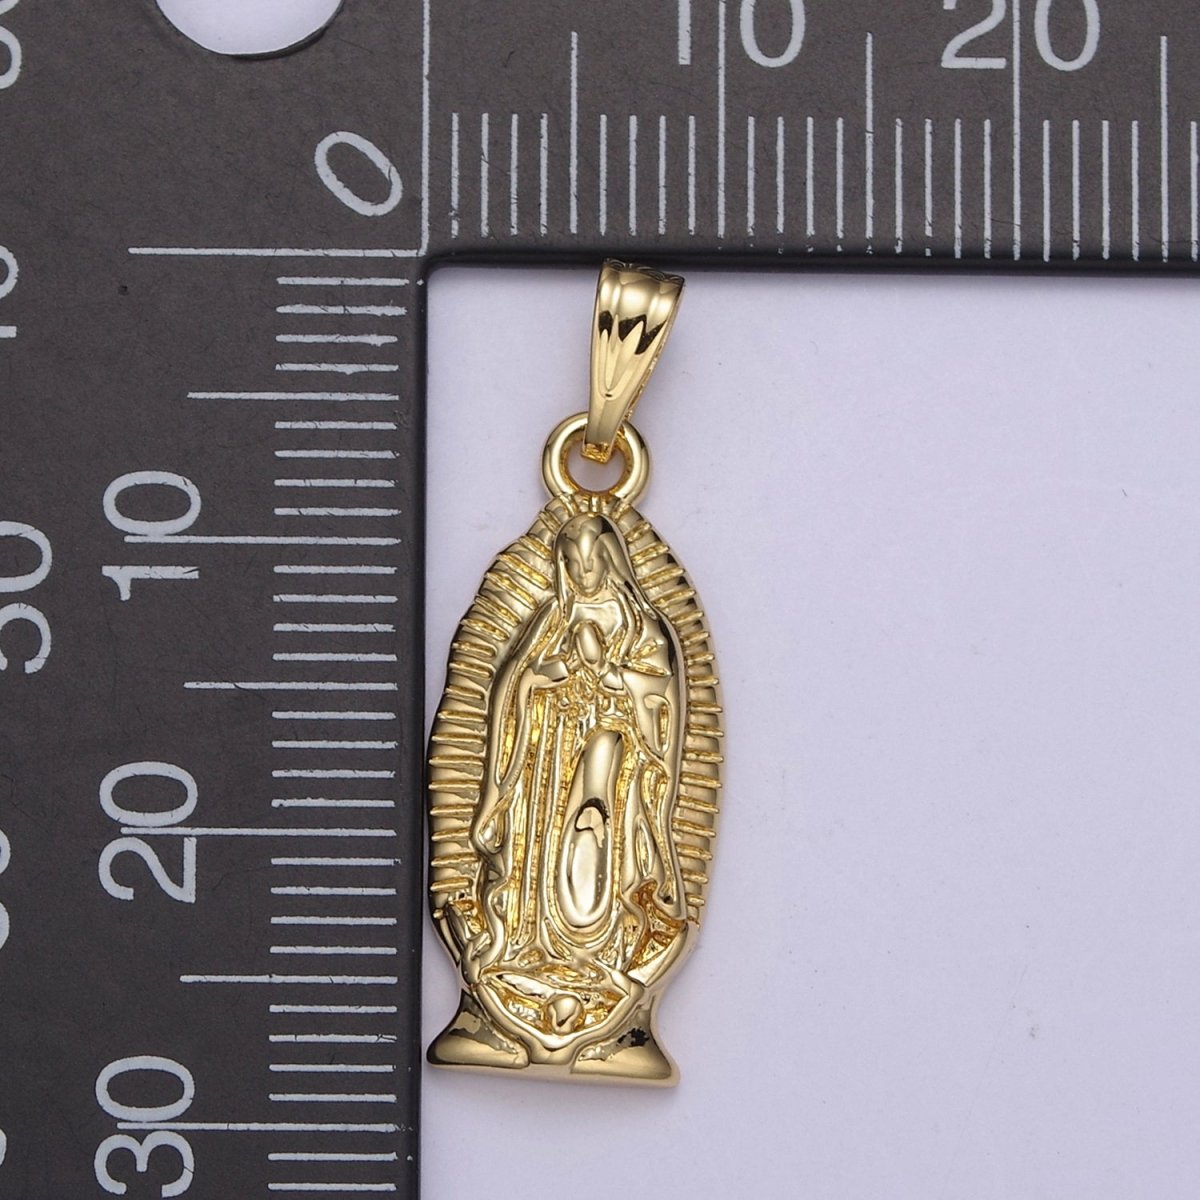 Gold Lady Guadalupe Charm Virgin Mary Pendant for Religious Jewelry Making N-542 - DLUXCA